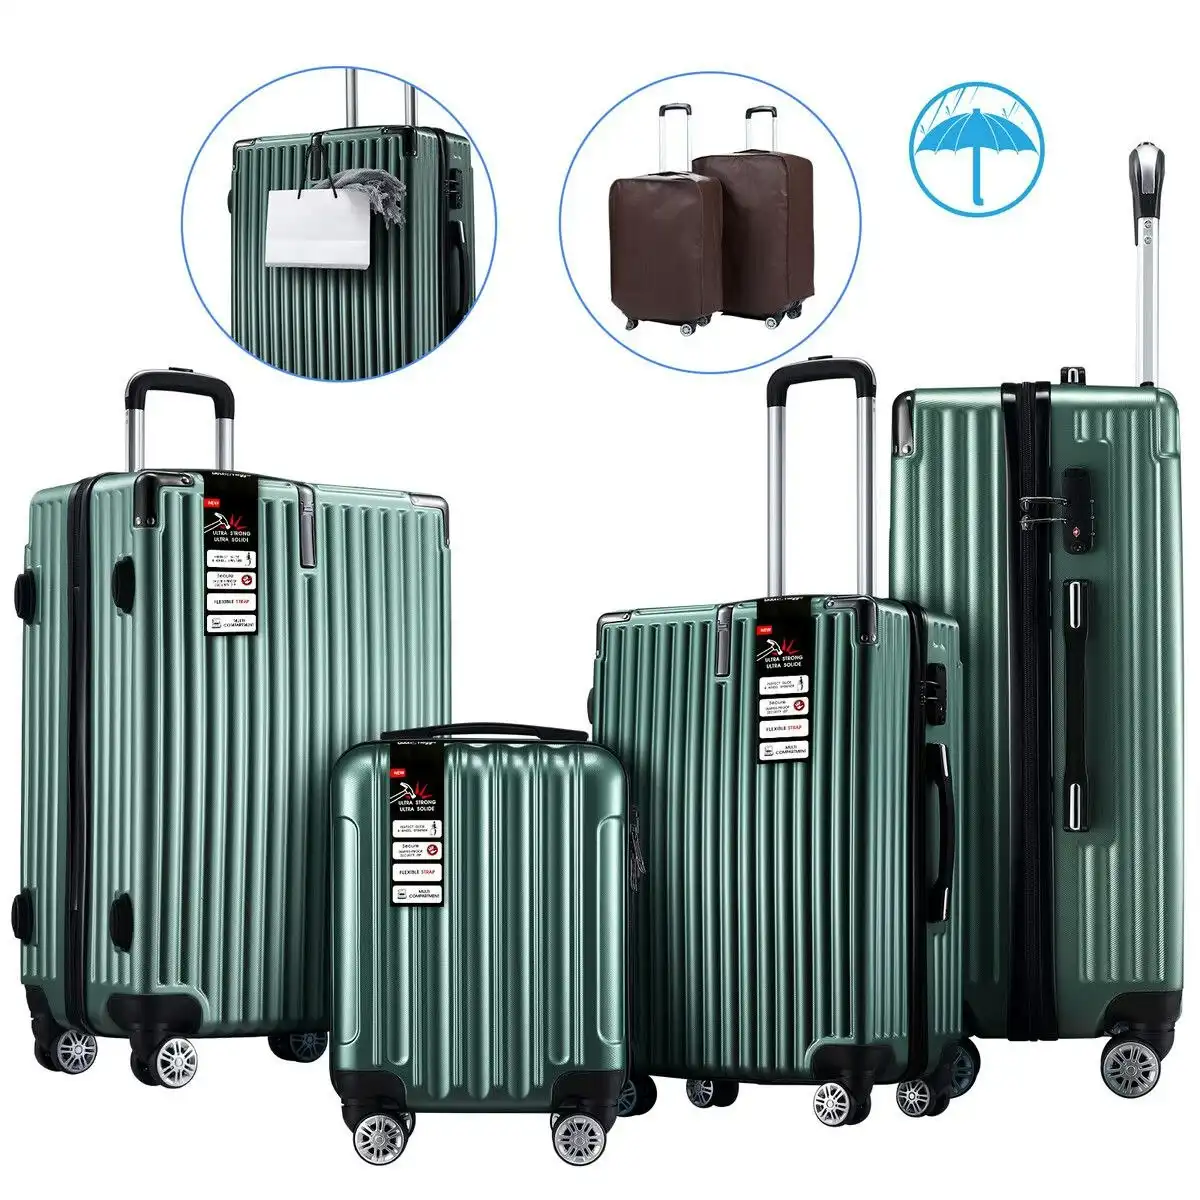 Buon Viaggio 4 Piece Luggage Set Carry On Suitcase Traveller Bag Hard Shell Rolling Trolley Checked TSA Lock Front Hook Lightweight Dark Green